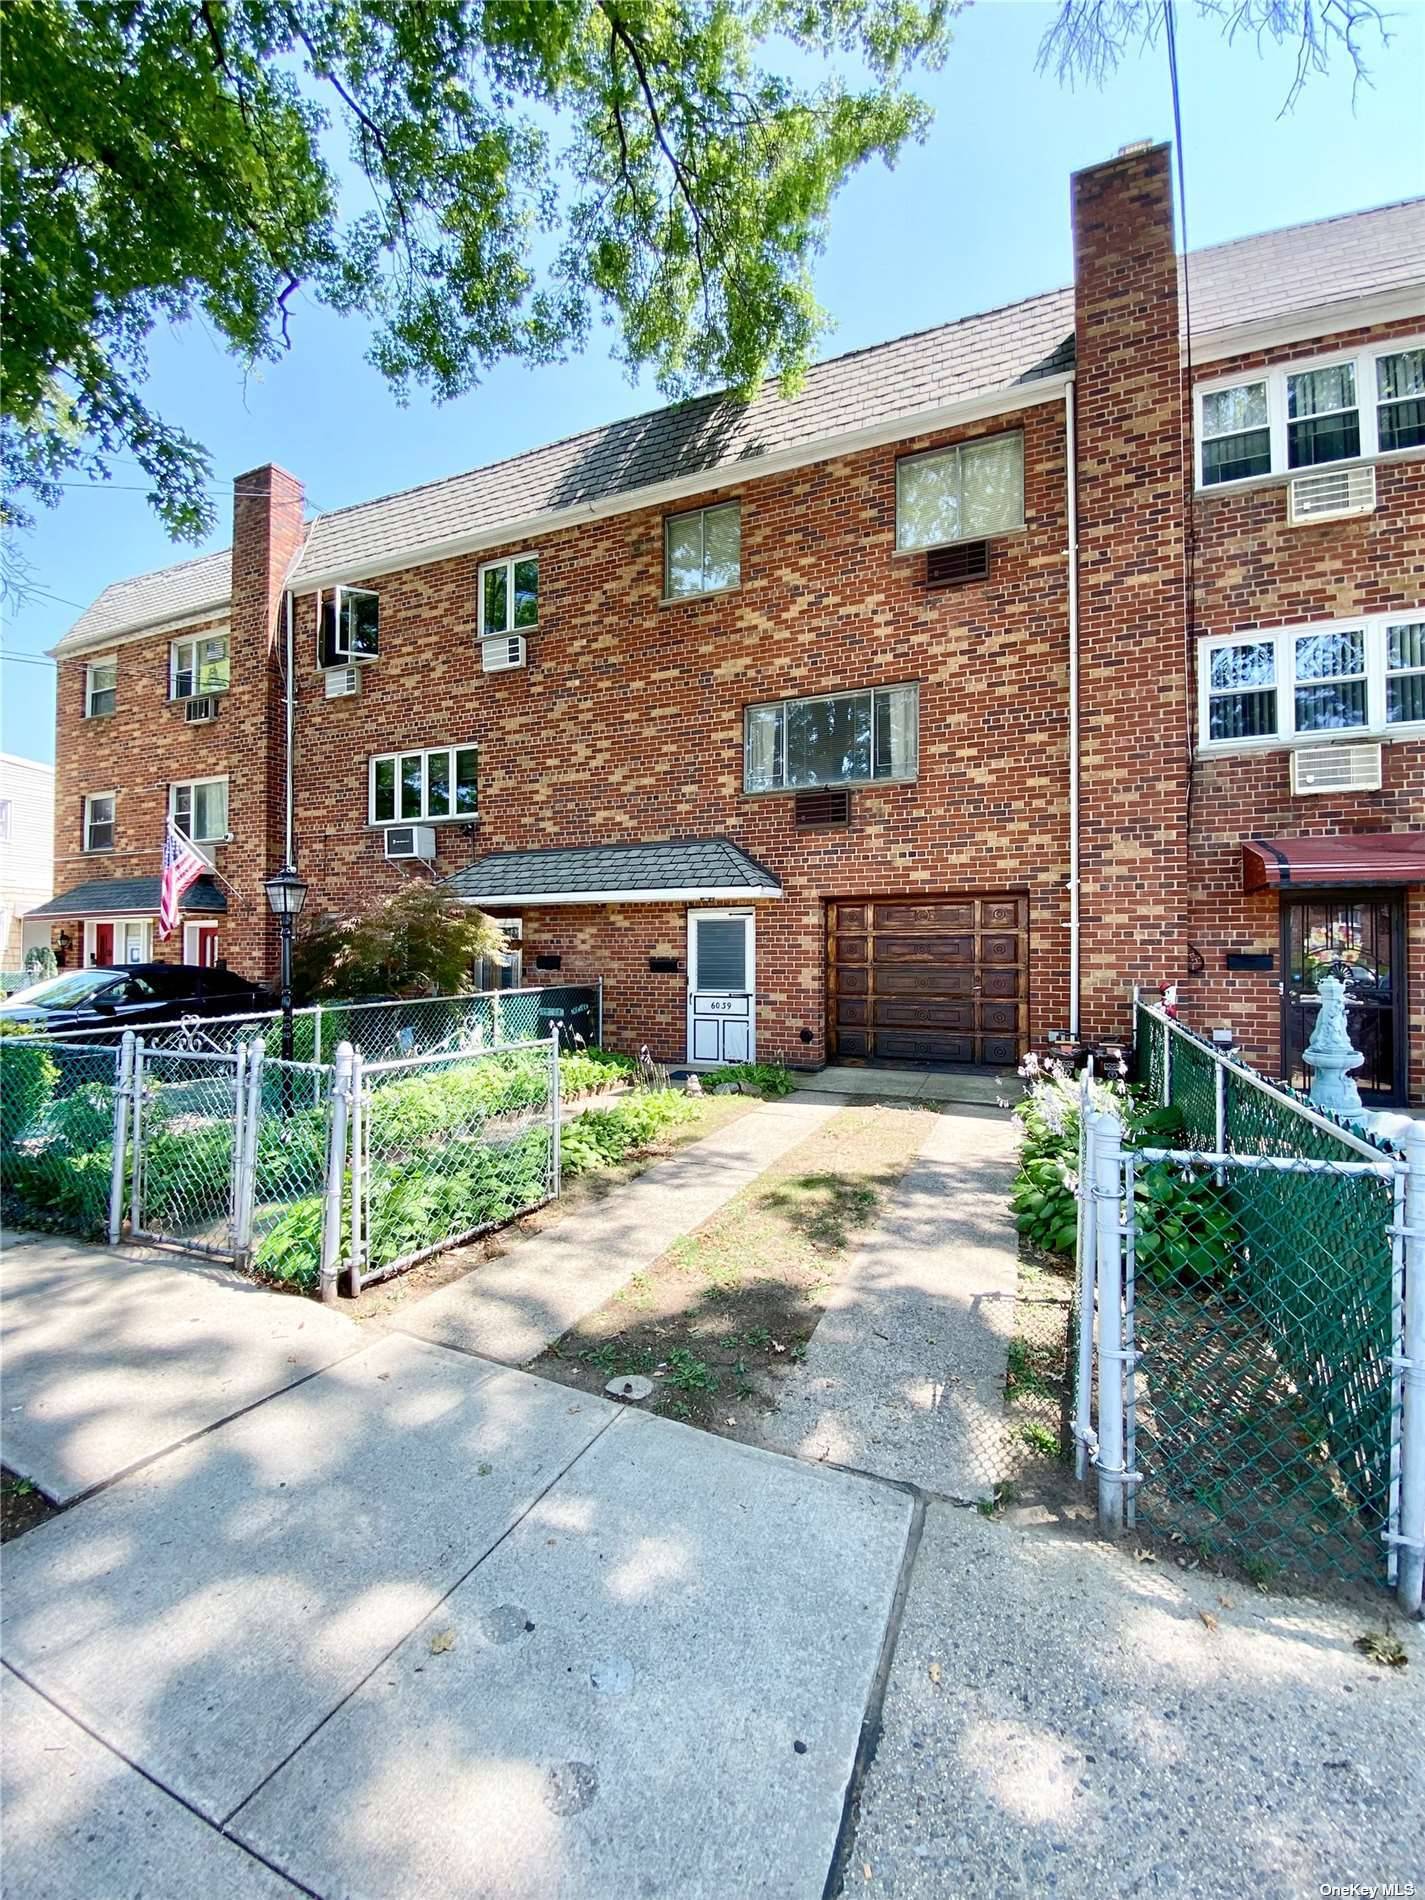 Welcome to this large legal 1 Family house located in central Maspeth, Queens.